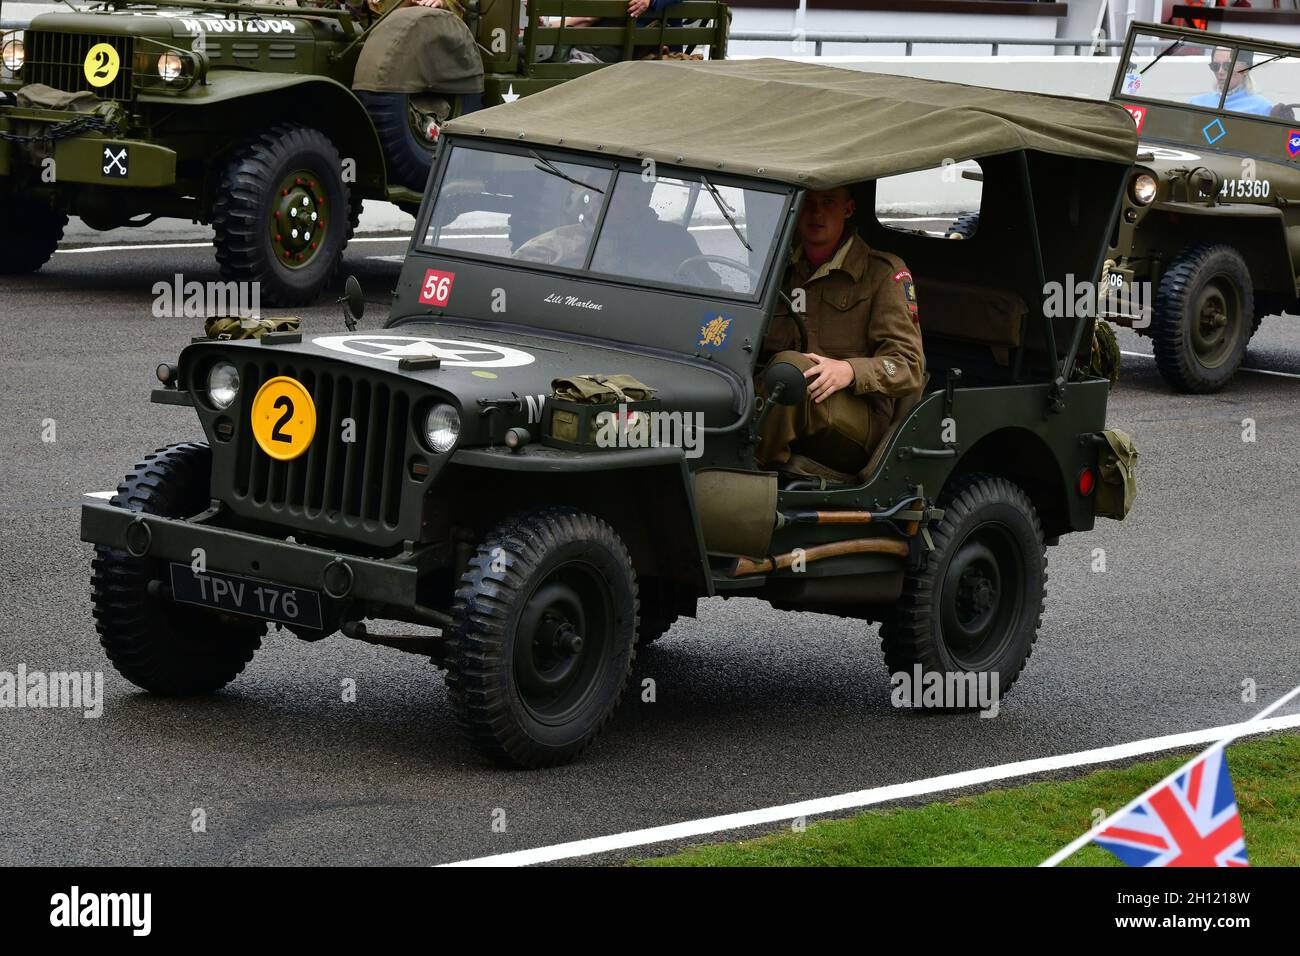 Hotchkiss Jeep, Victory Parade, Goodwood Revival 2021, Goodwood, Chichester, West Sussex, England, September 2021. Stock Photo